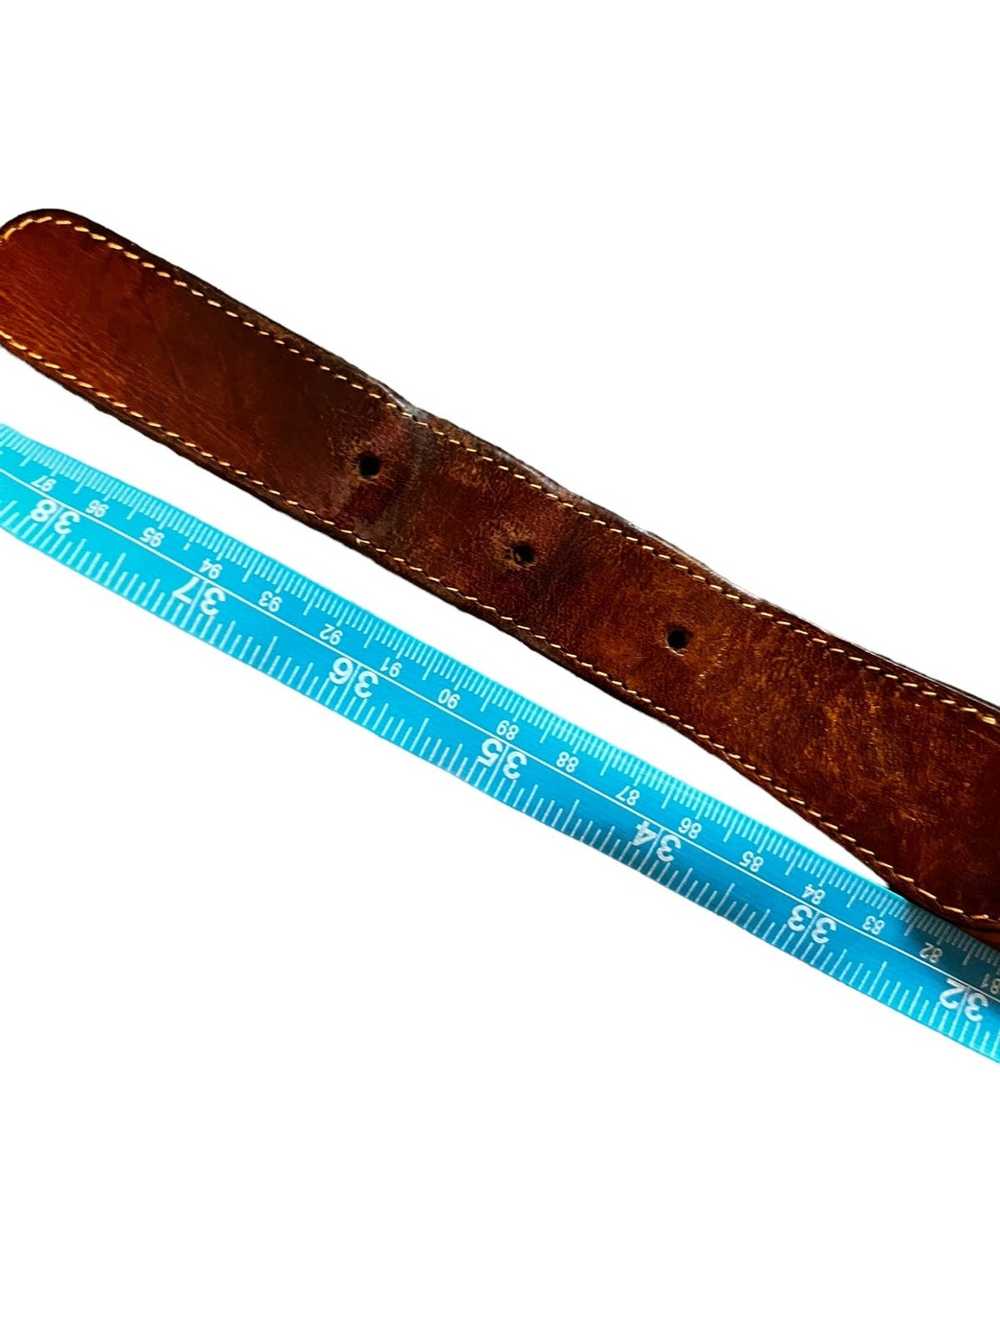 Jaeger Leather Belt Made in Italy - image 6